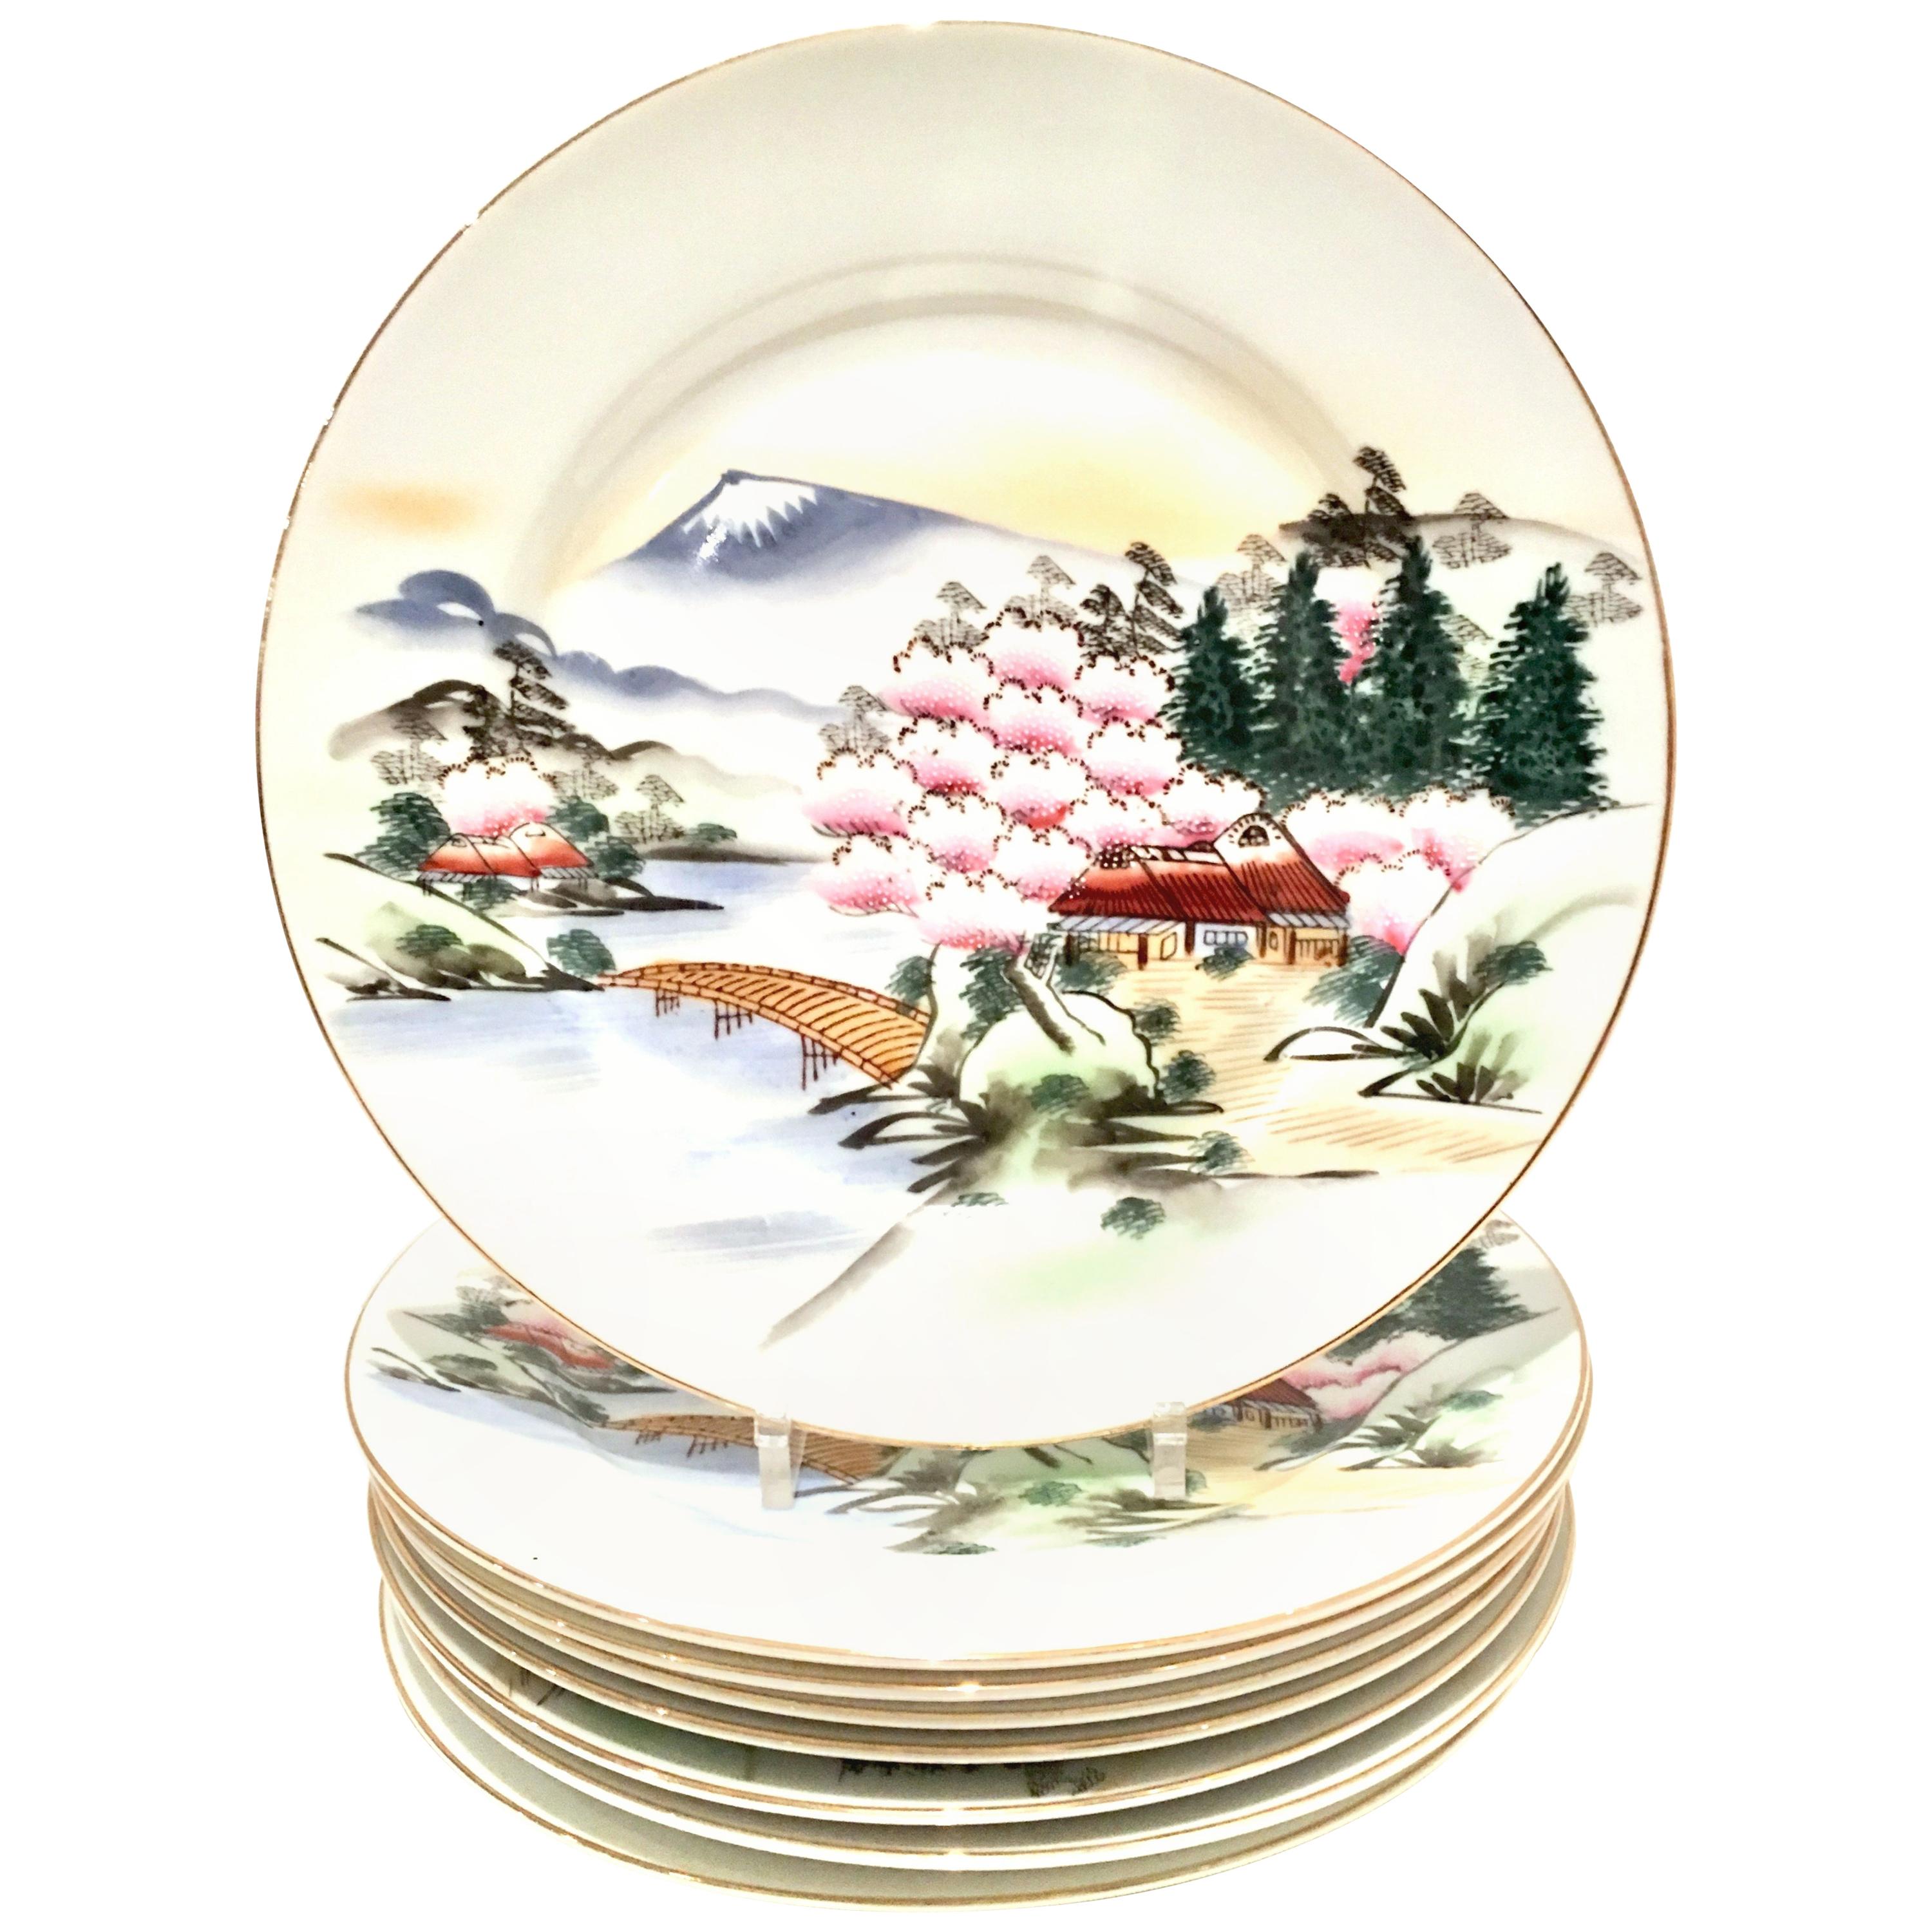 1950s Japanese Hand Painted Porcelain Dinner Plate Set of 8 by, Hayasi